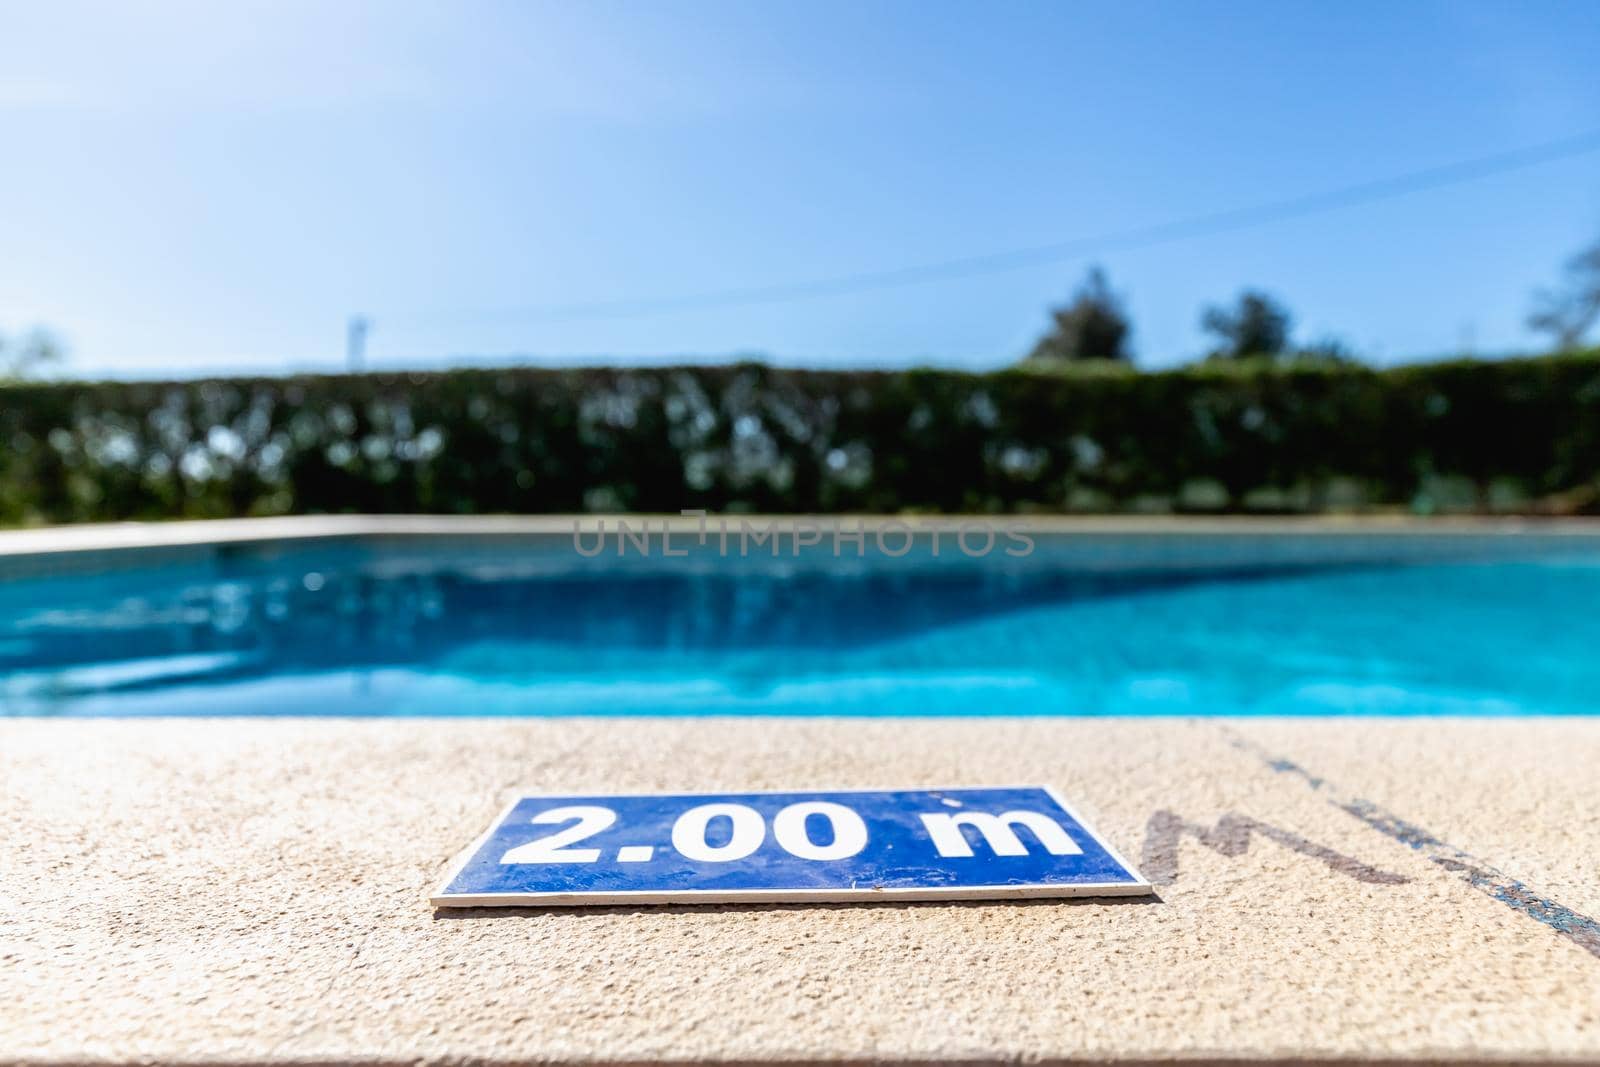 blue plastic plate at the edge of a swimming pool indicating a depth of 2.00 meters